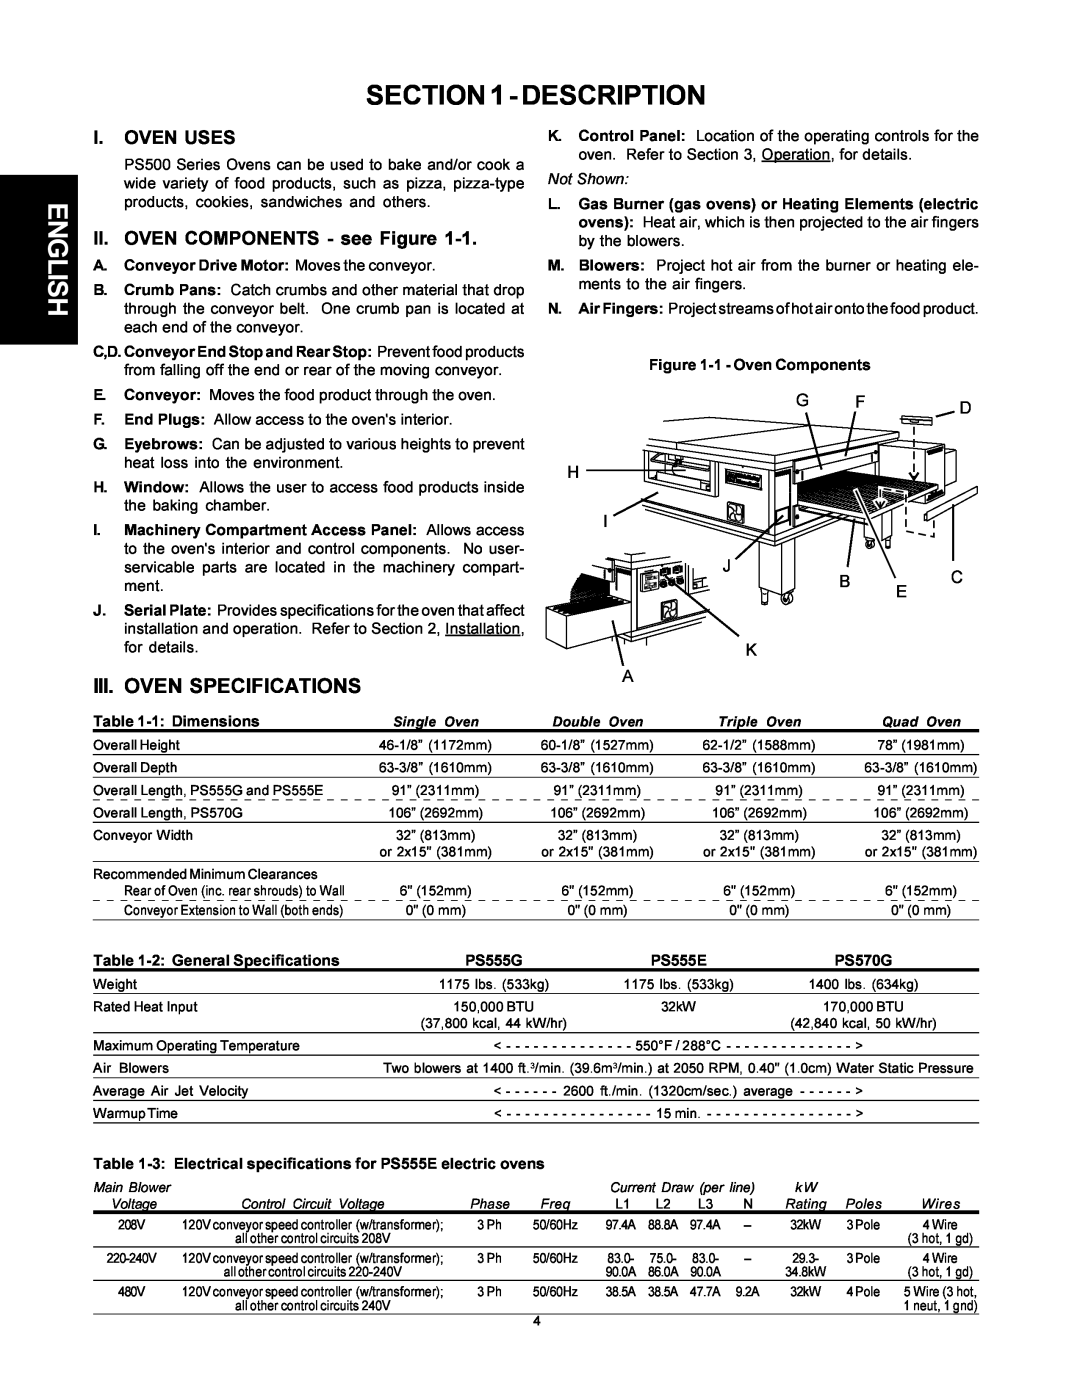 Middleby Marshall PS500 Description, Iii. Oven Specifications, I. Oven Uses, II. OVEN COMPONENTS - see Figure, English 